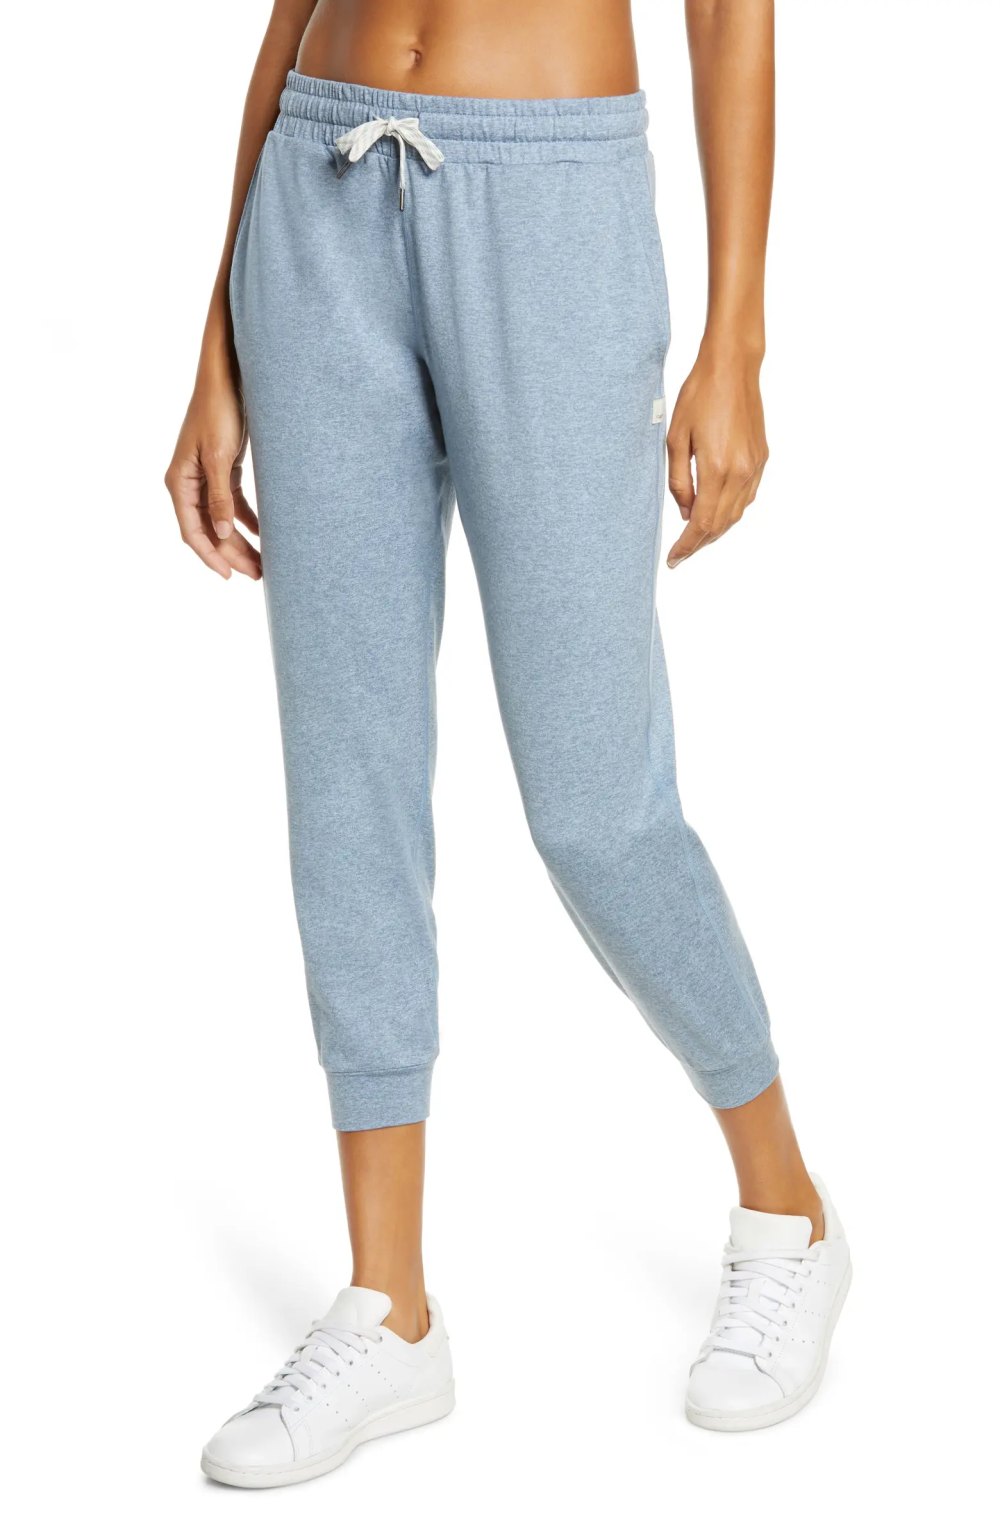 Shop These 11 Lightweight Joggers for Summer Lounging — $20 and Up